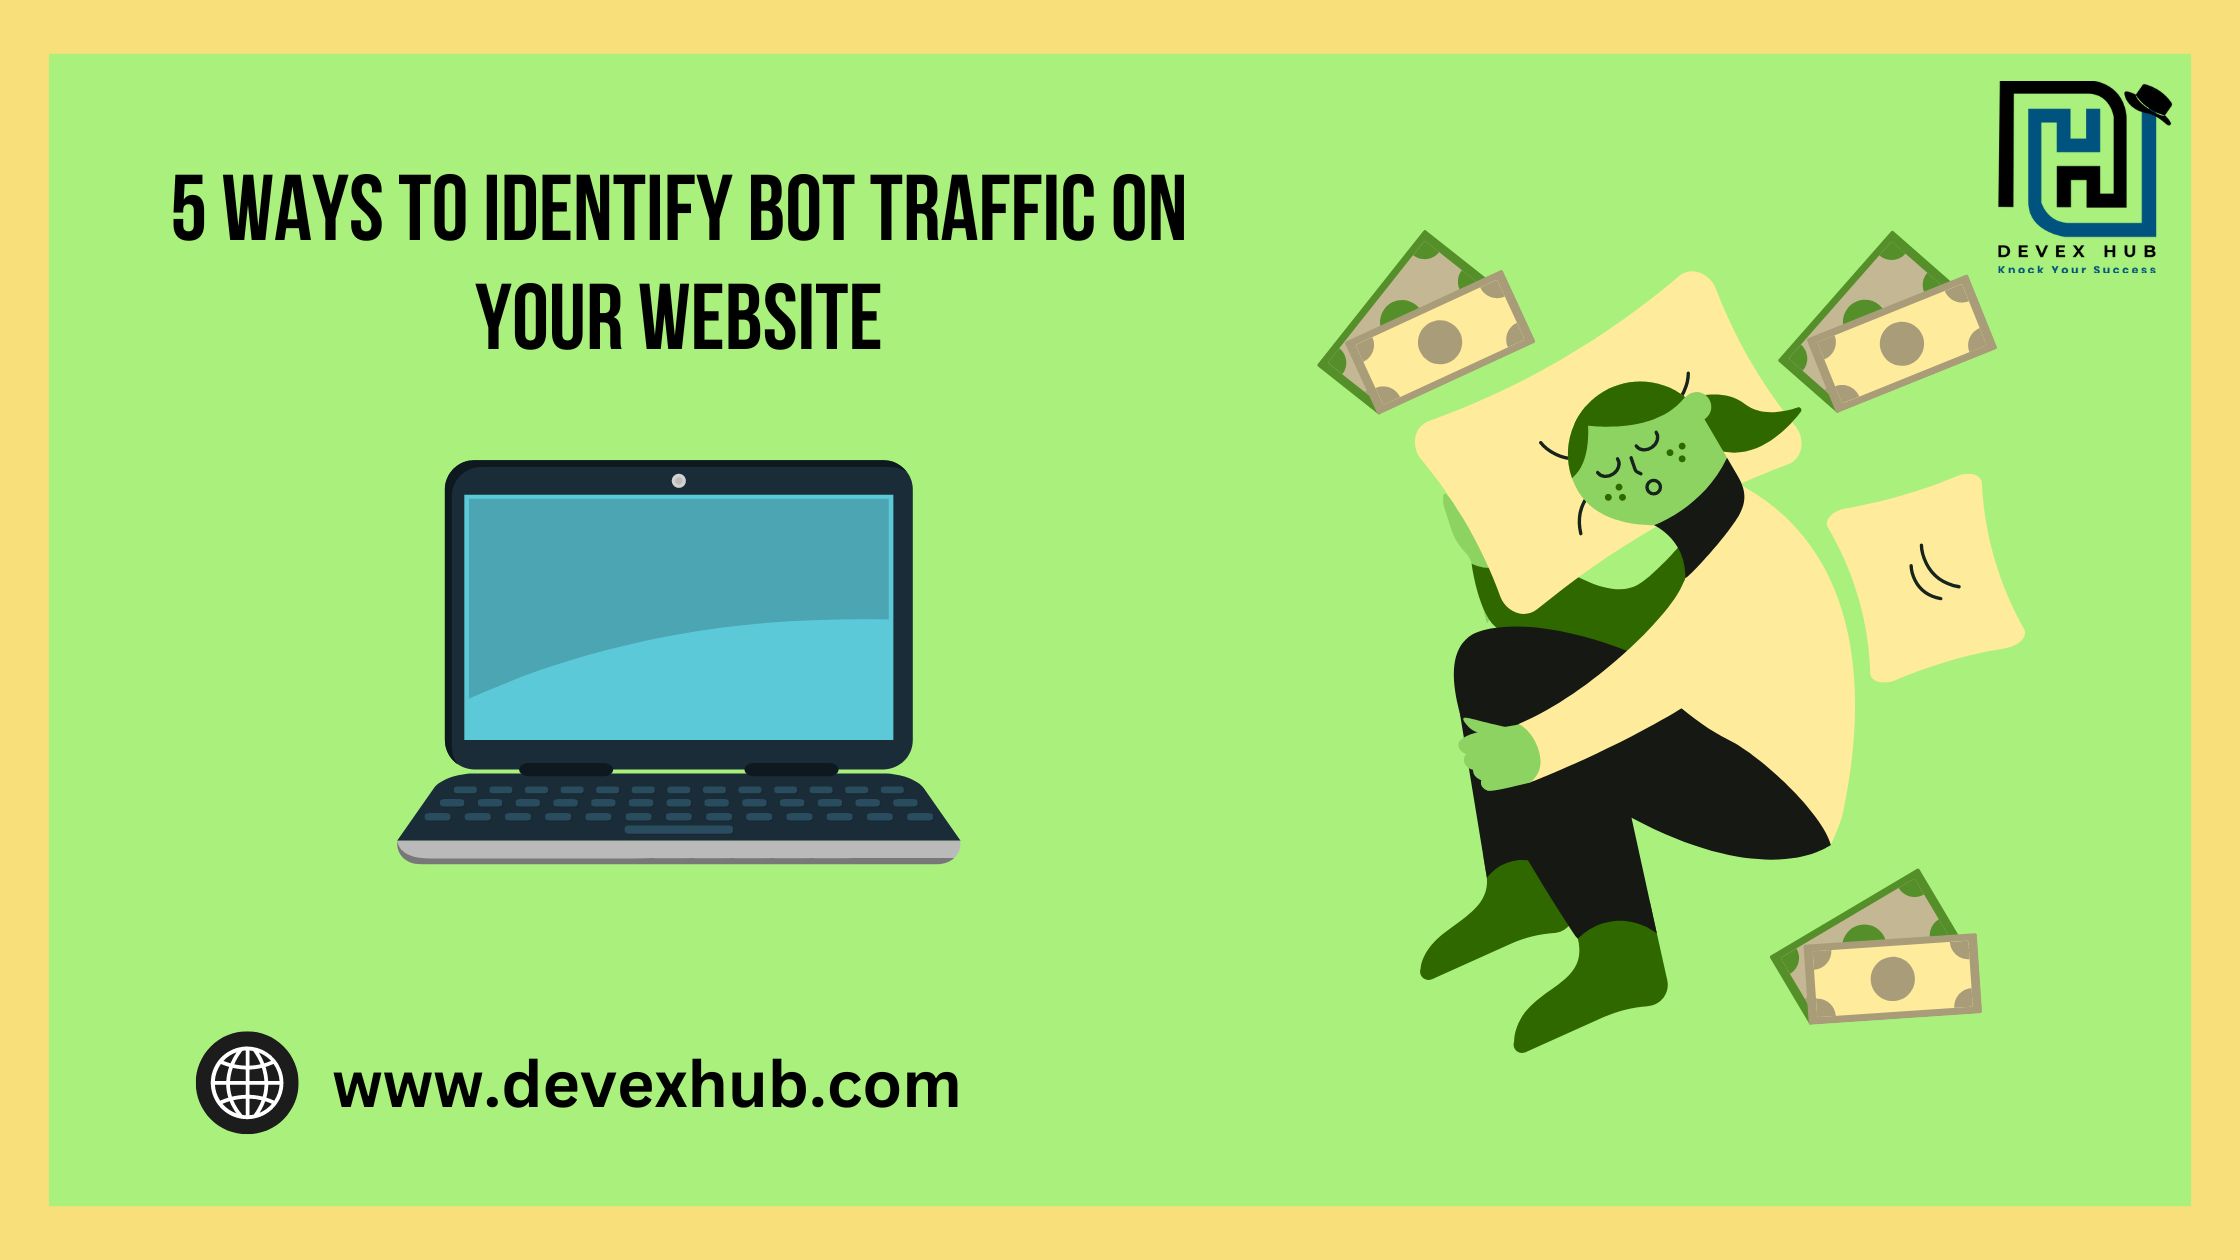 5 Ways to Identify Bot Traffic on Your Website